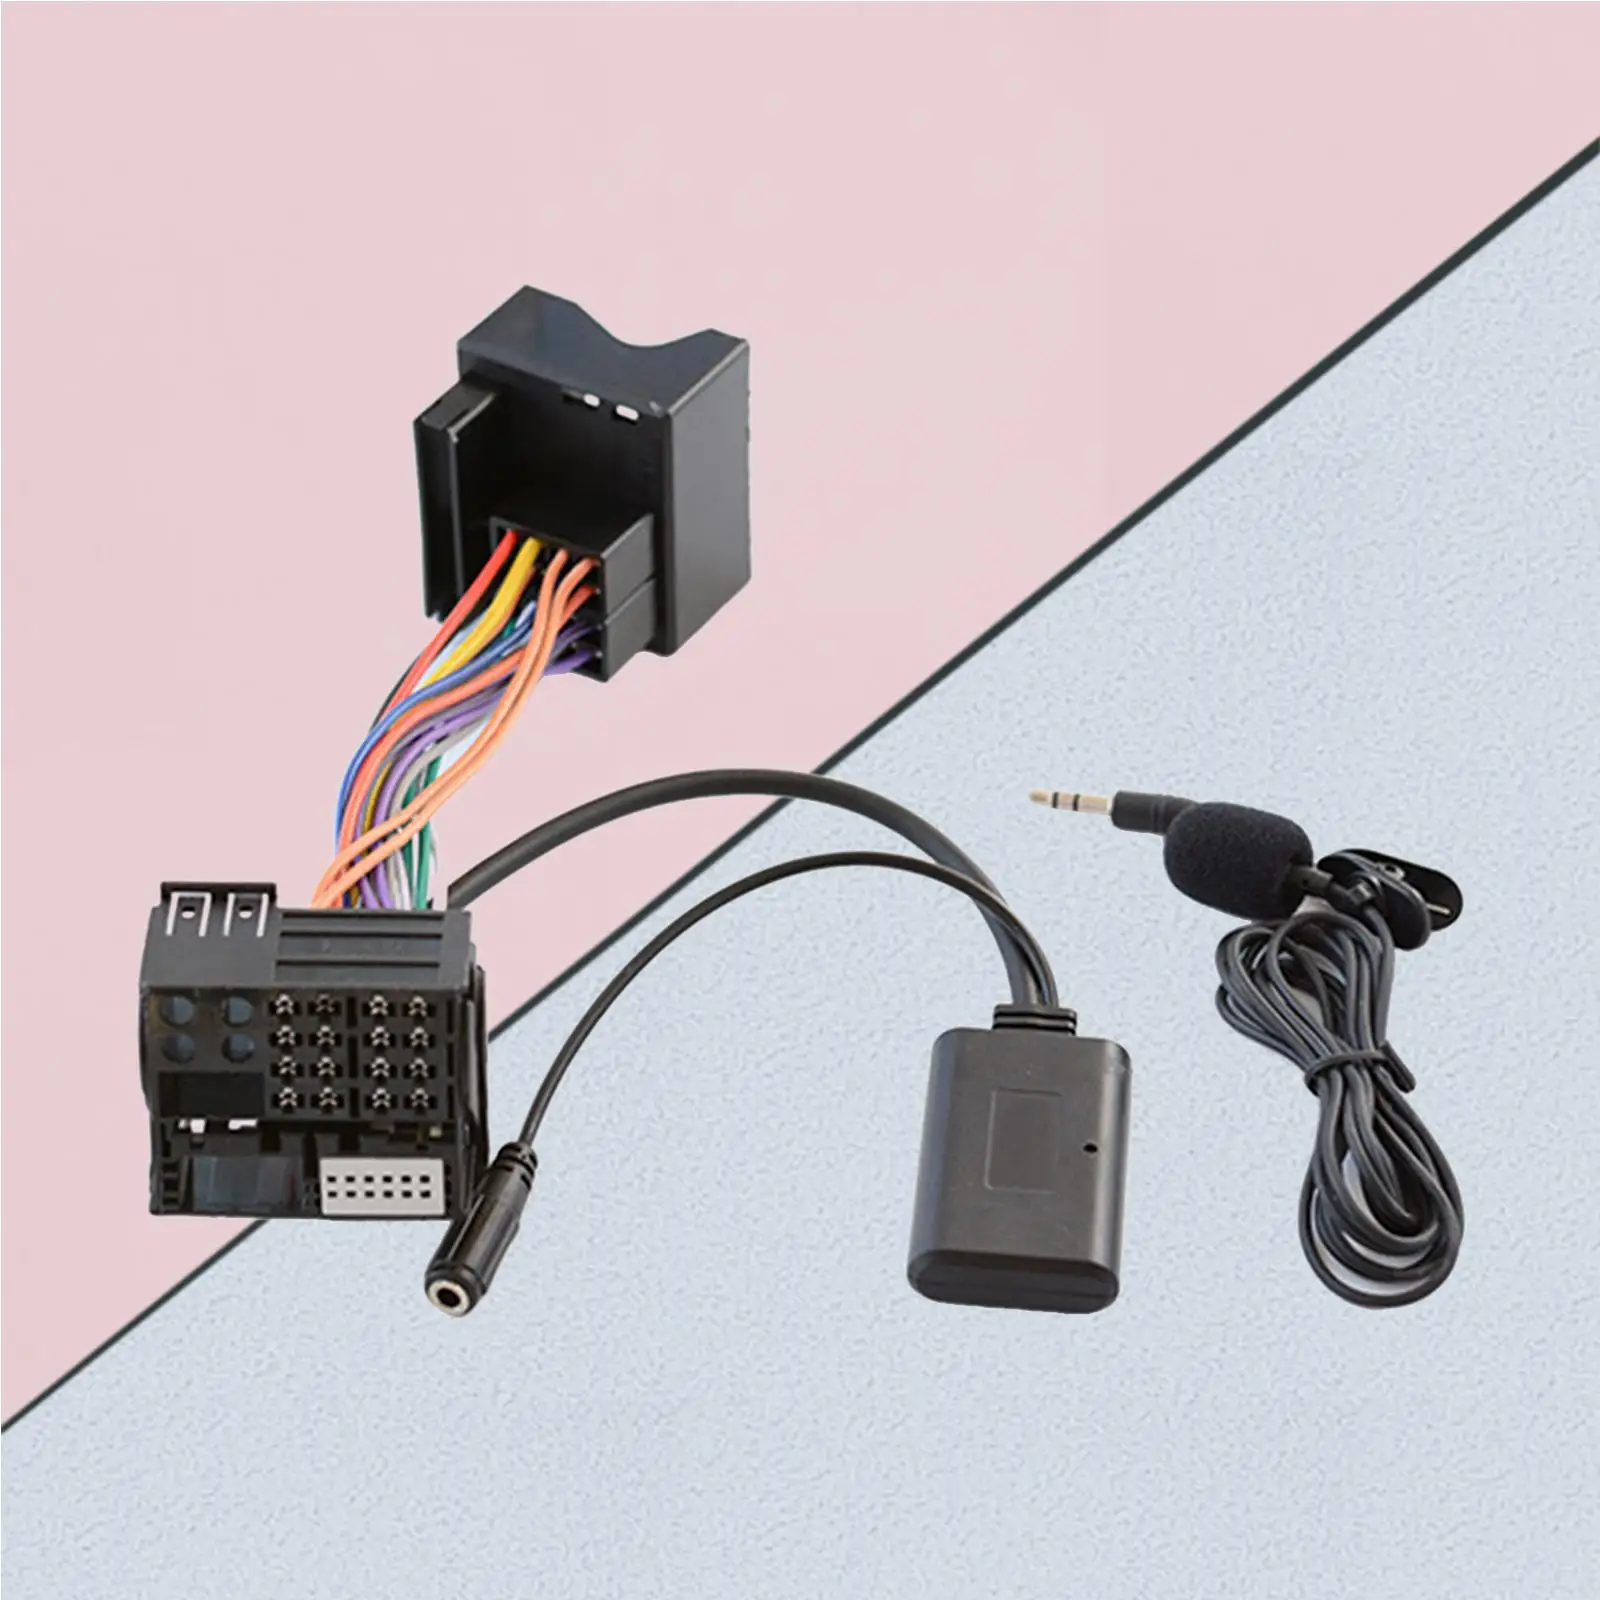  V5.0 Radio Module Aux Receiver Audio Cable Converter Plug  with 1x Microphone Fit for RCD510 RCD210